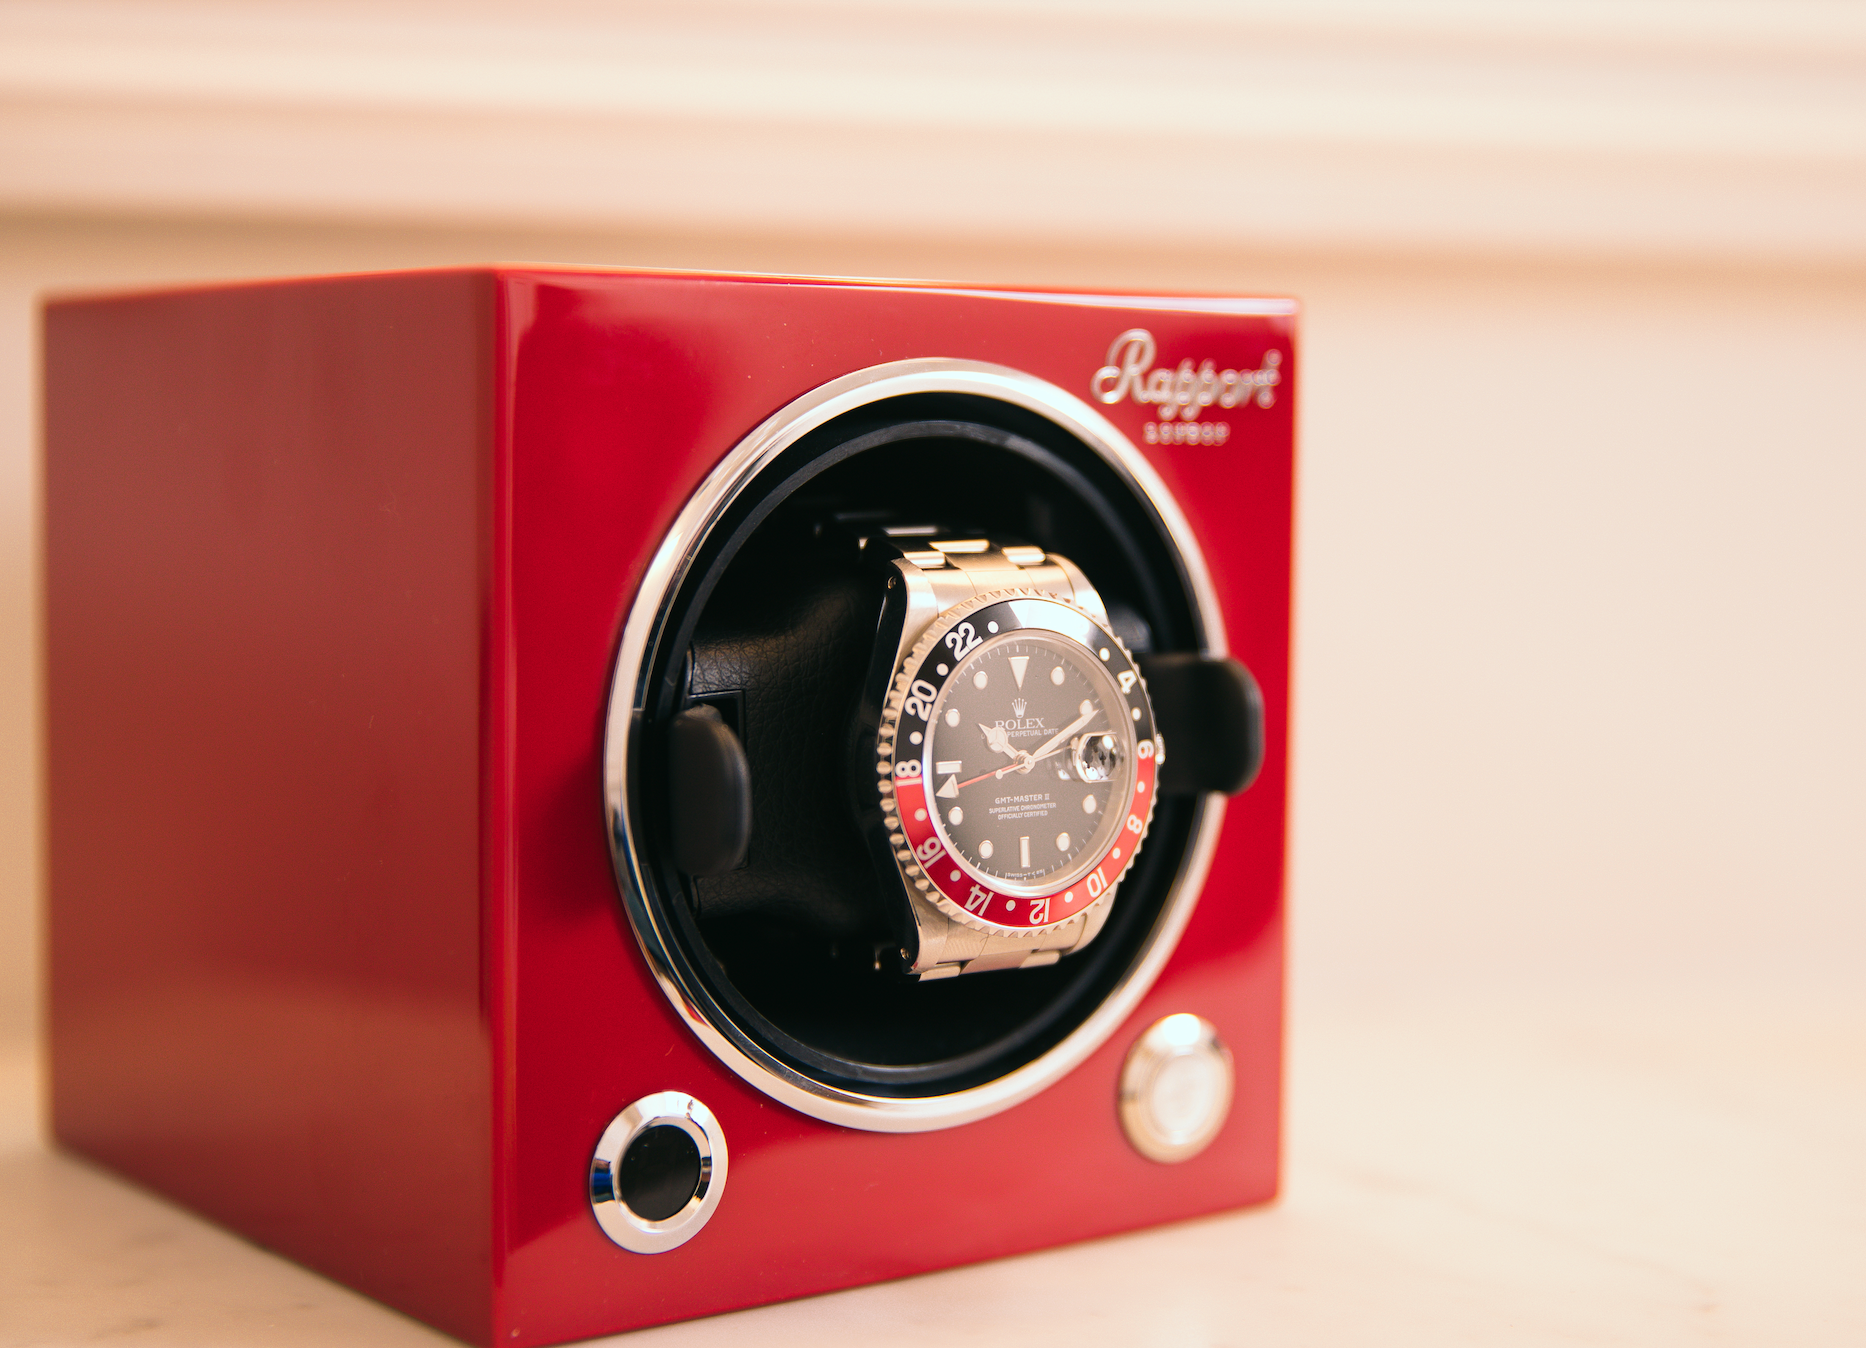 Article: The Evo Watch Winder: The Must-Have Winder For Every Collector